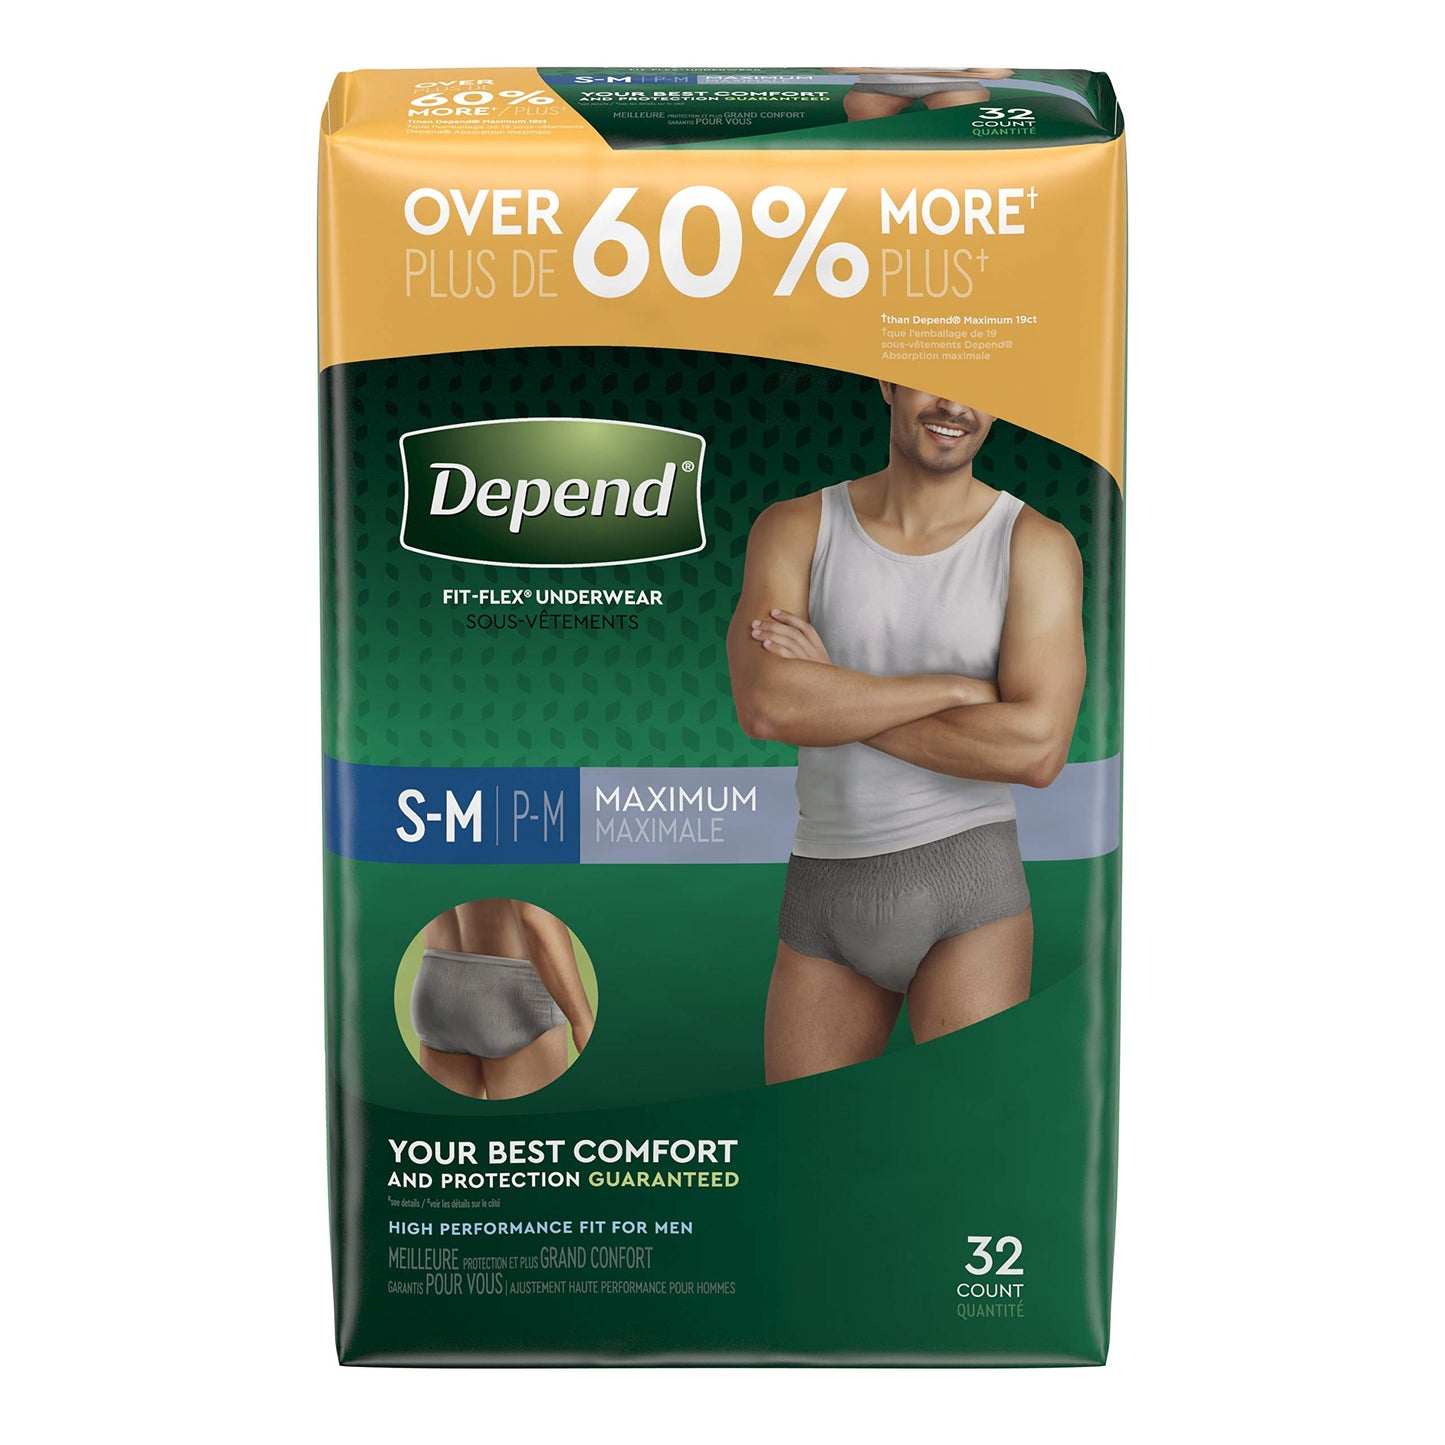 Depend Depend FIT-Flex Incontinence Underwear for Men, Maximum Absorbency, Disposable, Small/Medium, Grey, 32 Count (Packaging May Vary), 32 Count